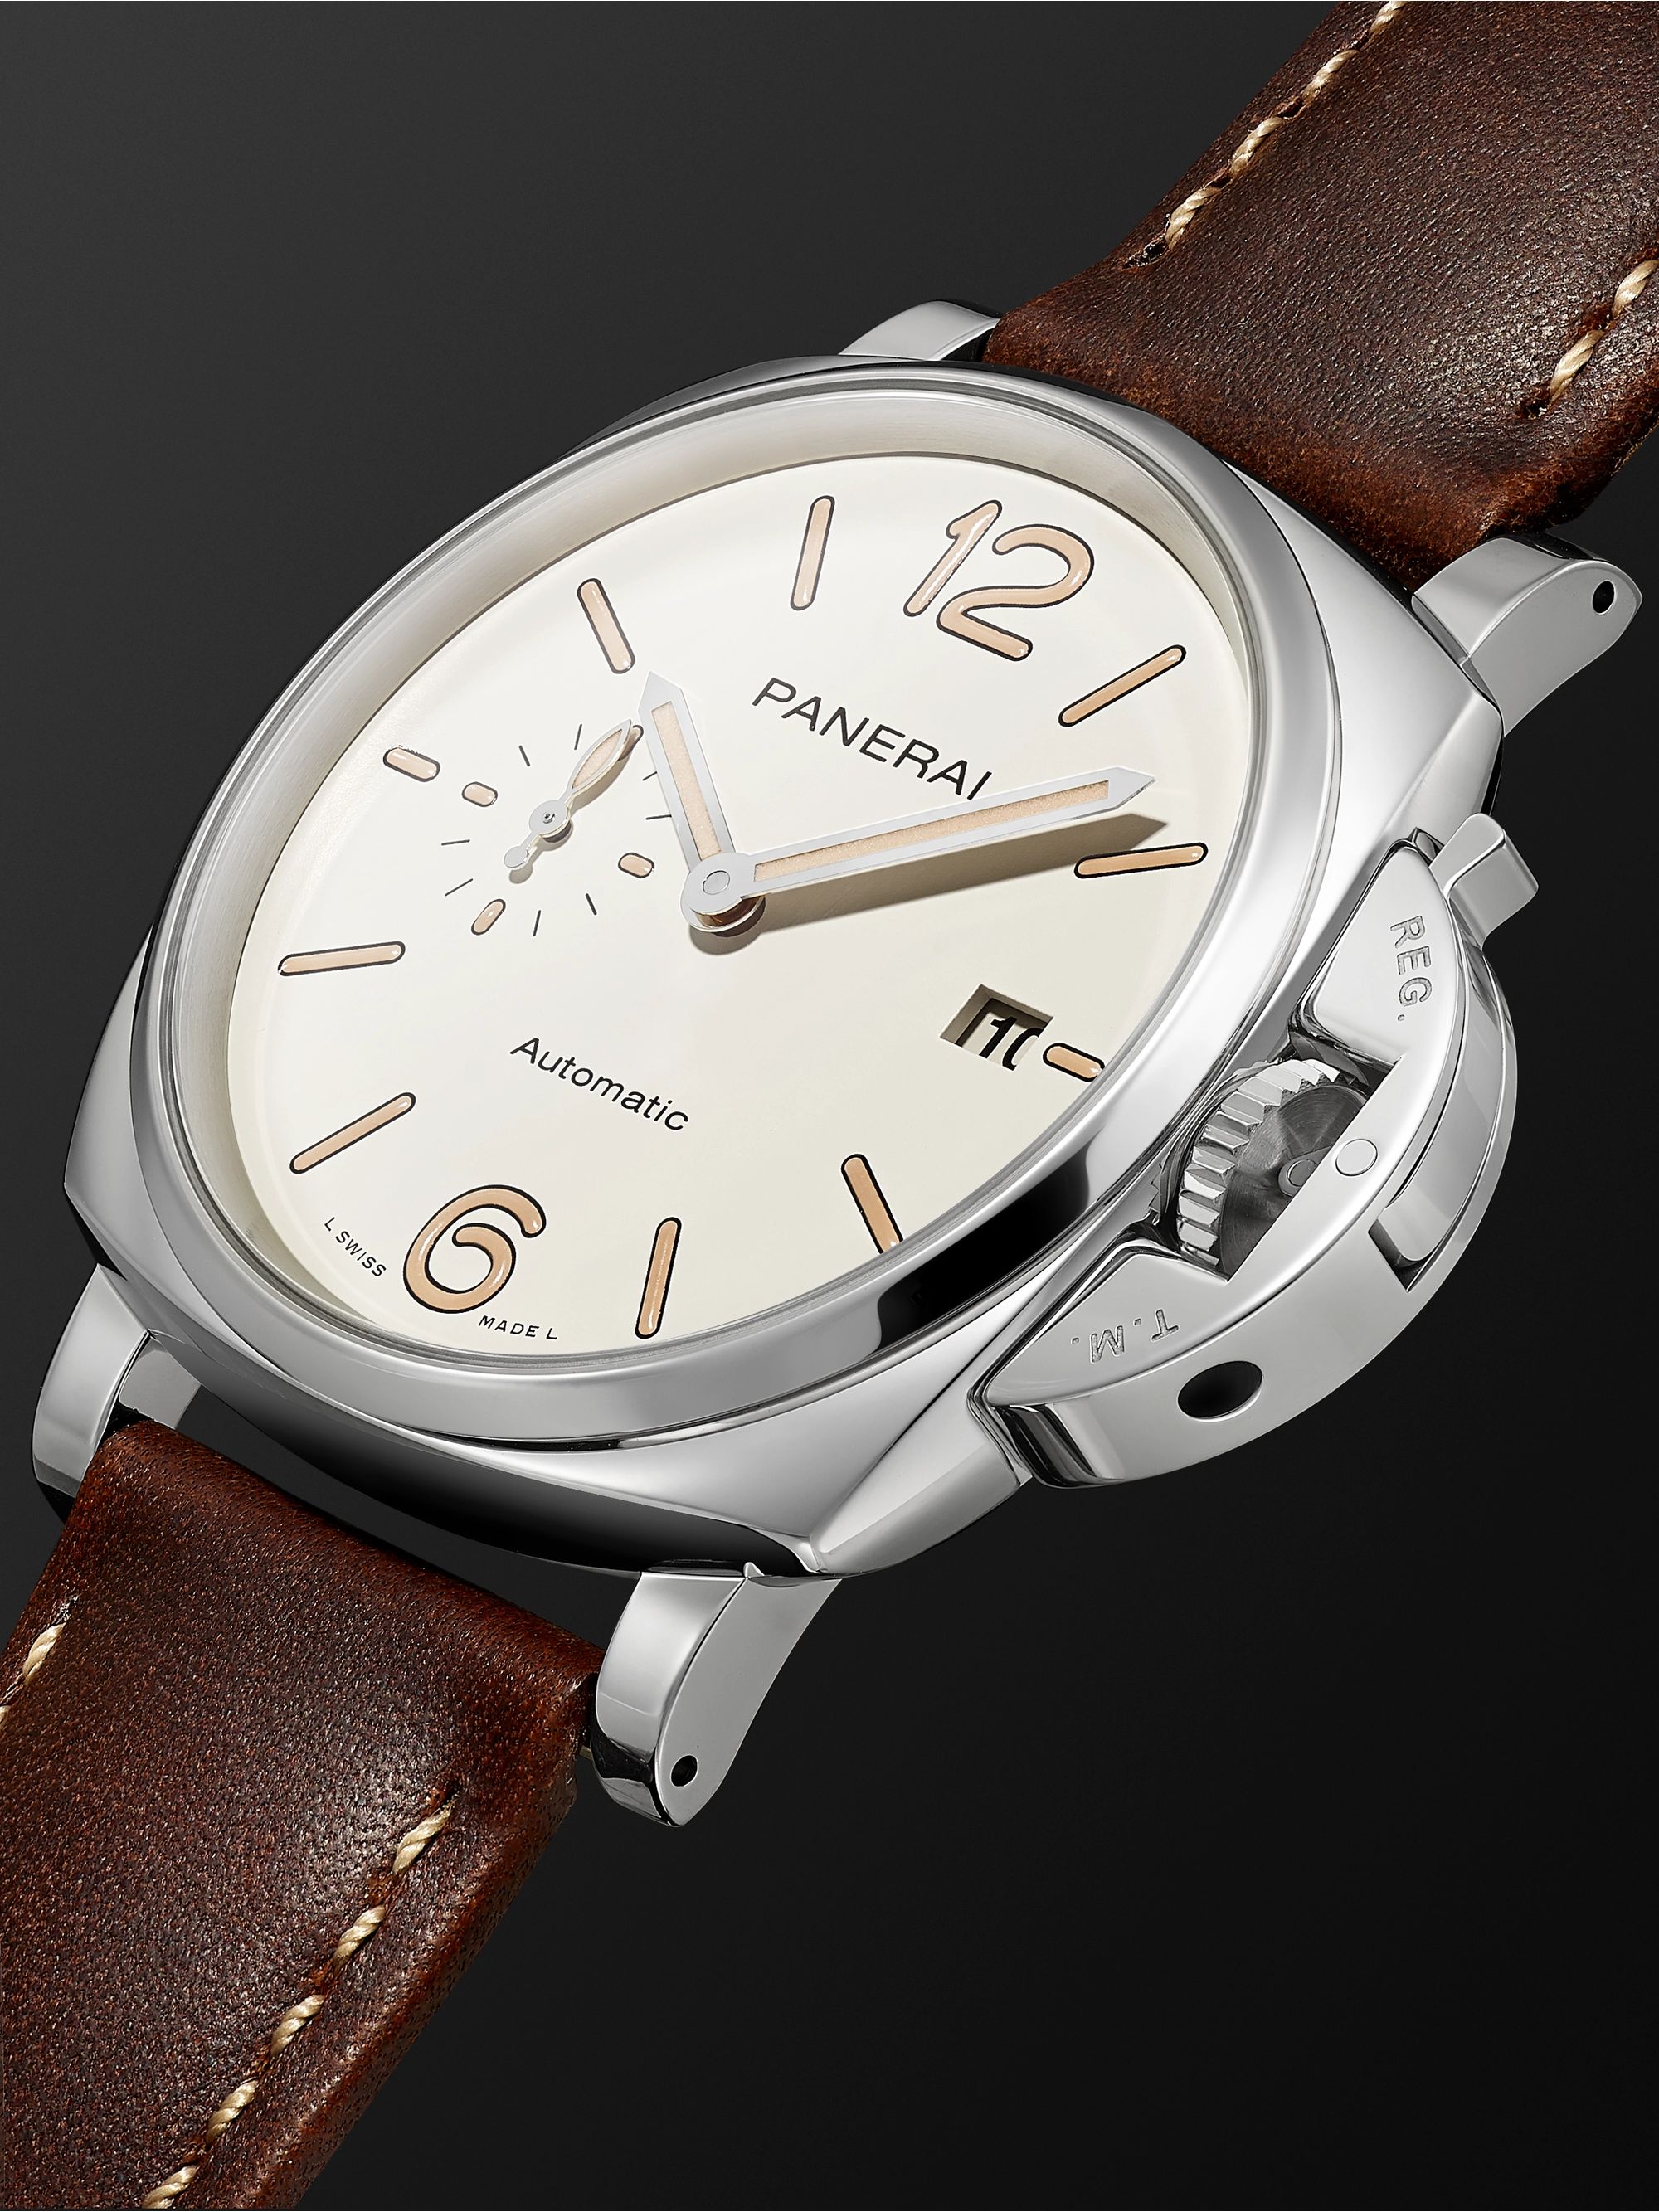 PANERAI Luminor Due Automatic 42mm Stainless Steel and Leather Watch, Ref. No. PAM01046